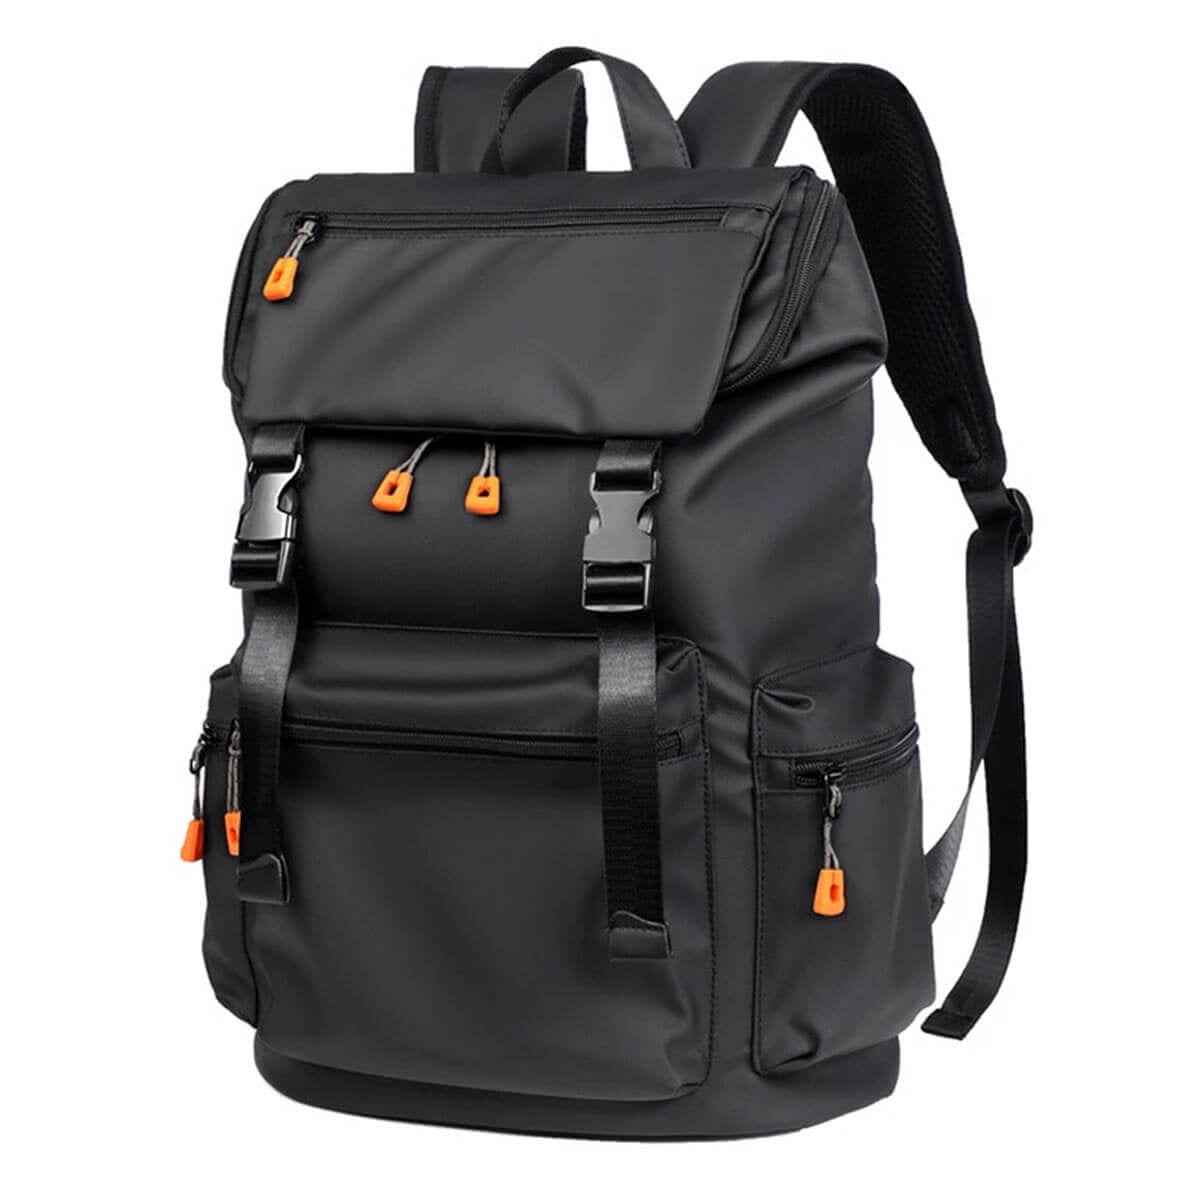 Large Capacity Business Travel High-Quality USB Charge Backpack